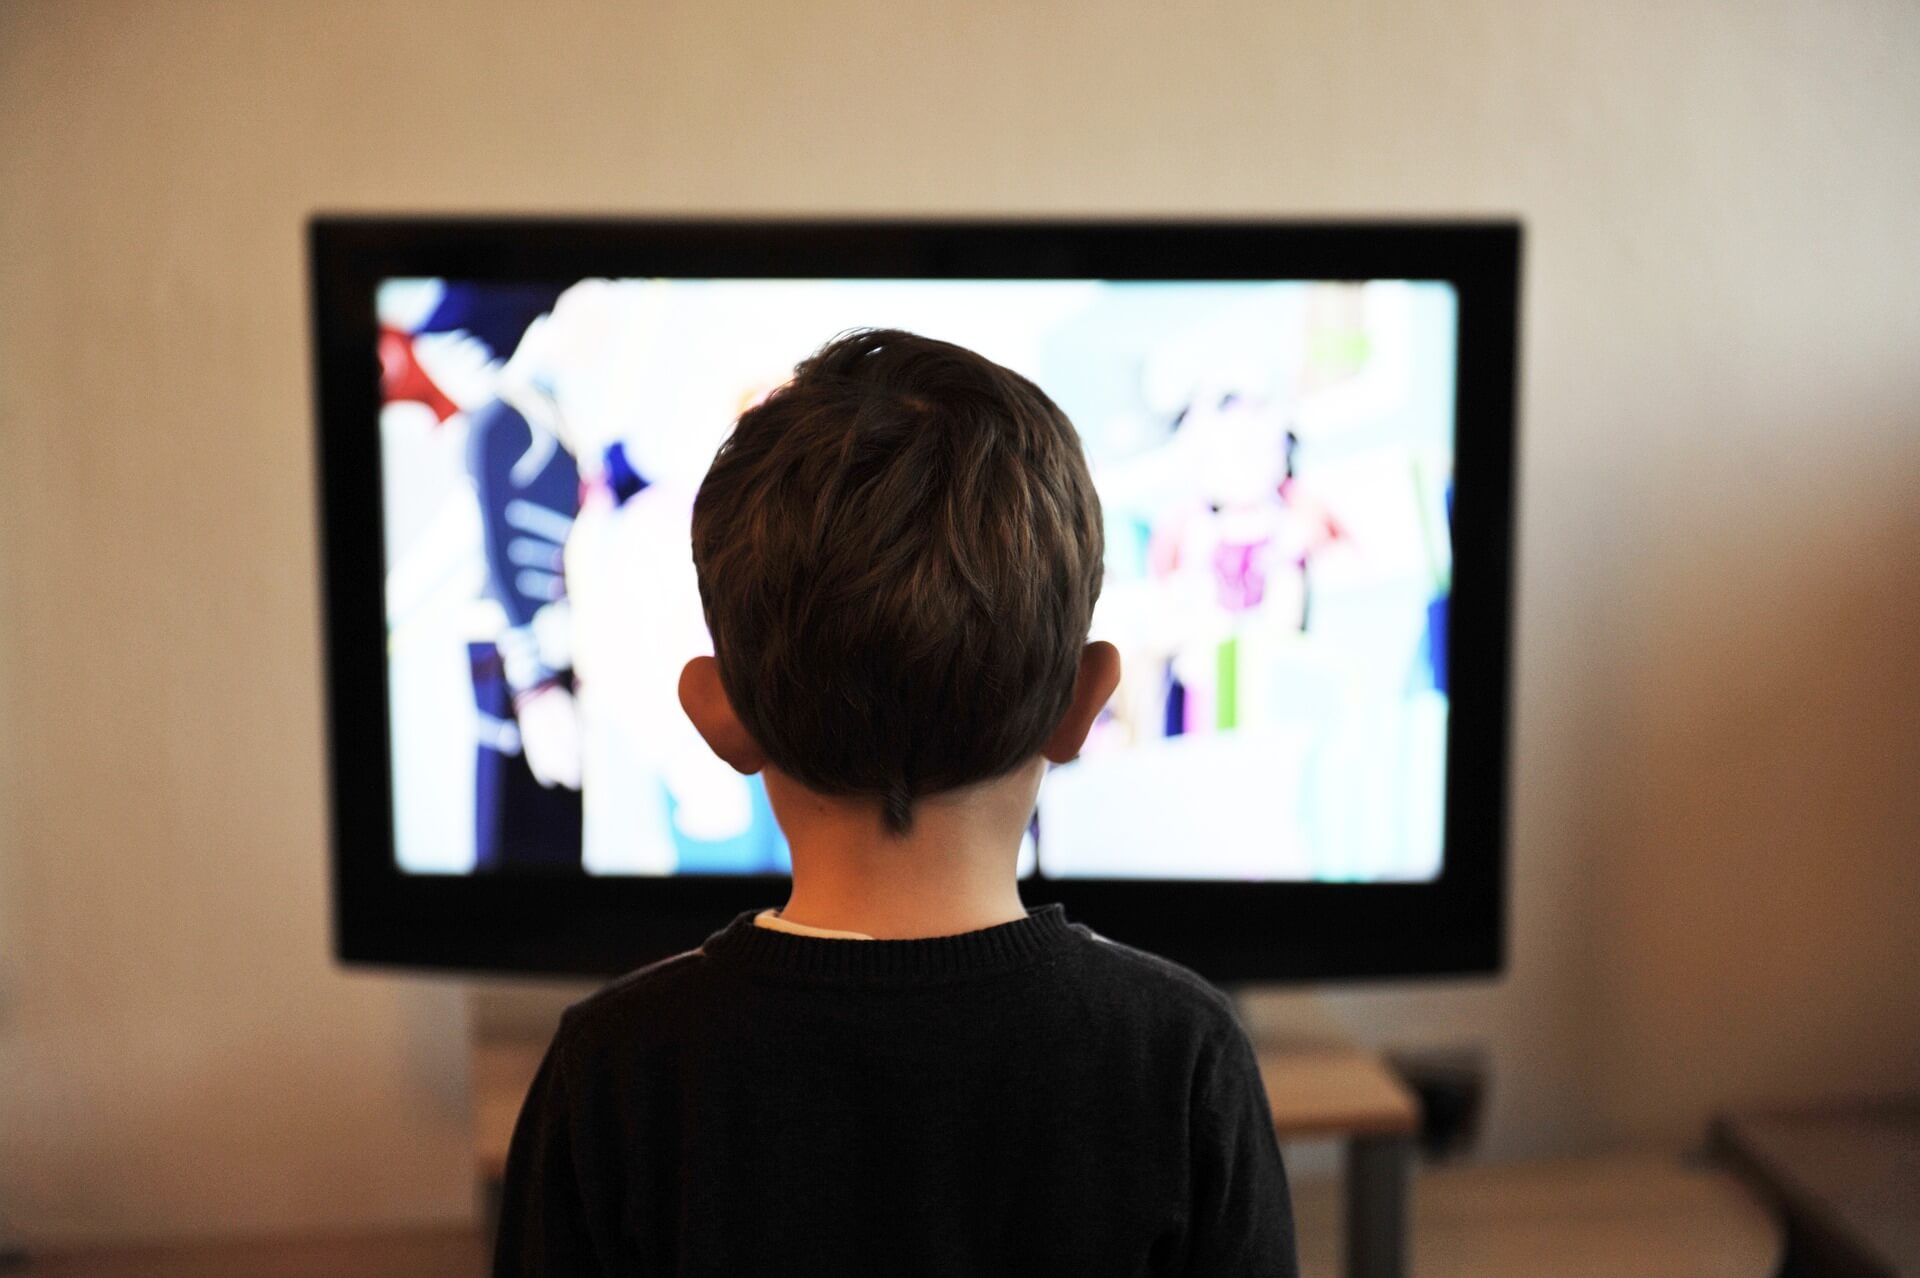 The link between screen time and childhood obesity